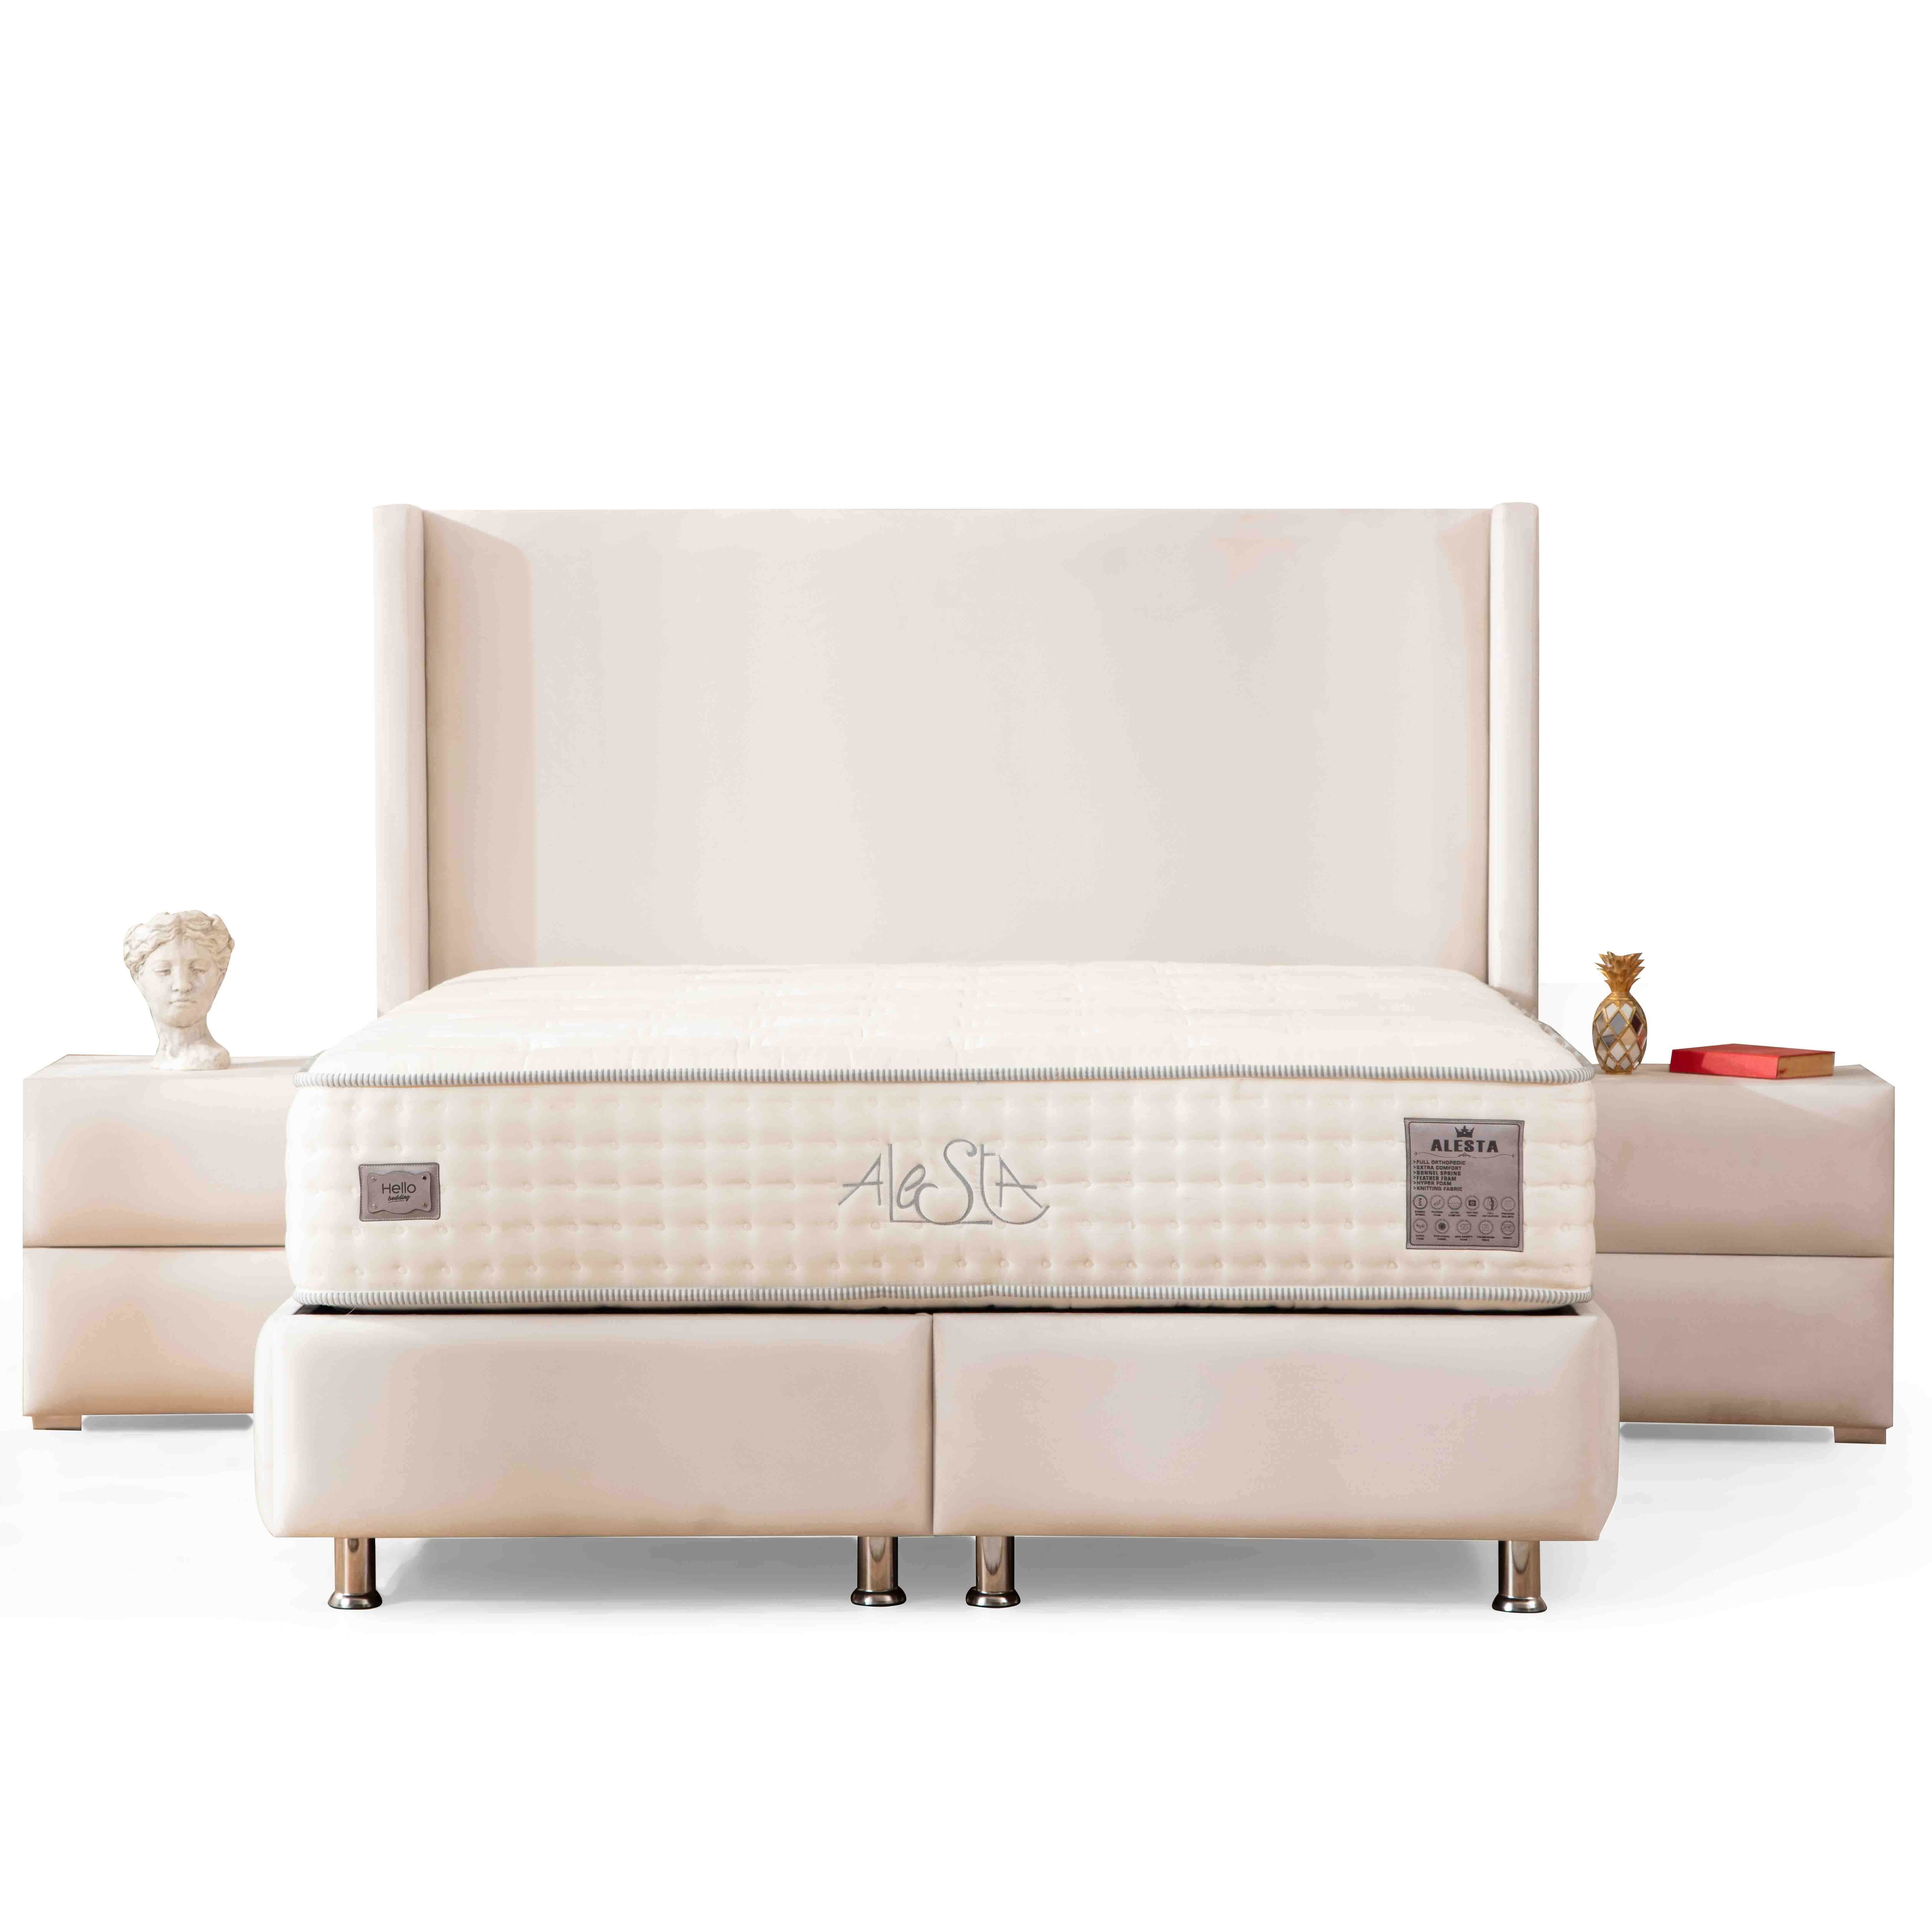 Lucca Bed With Storage 120*200